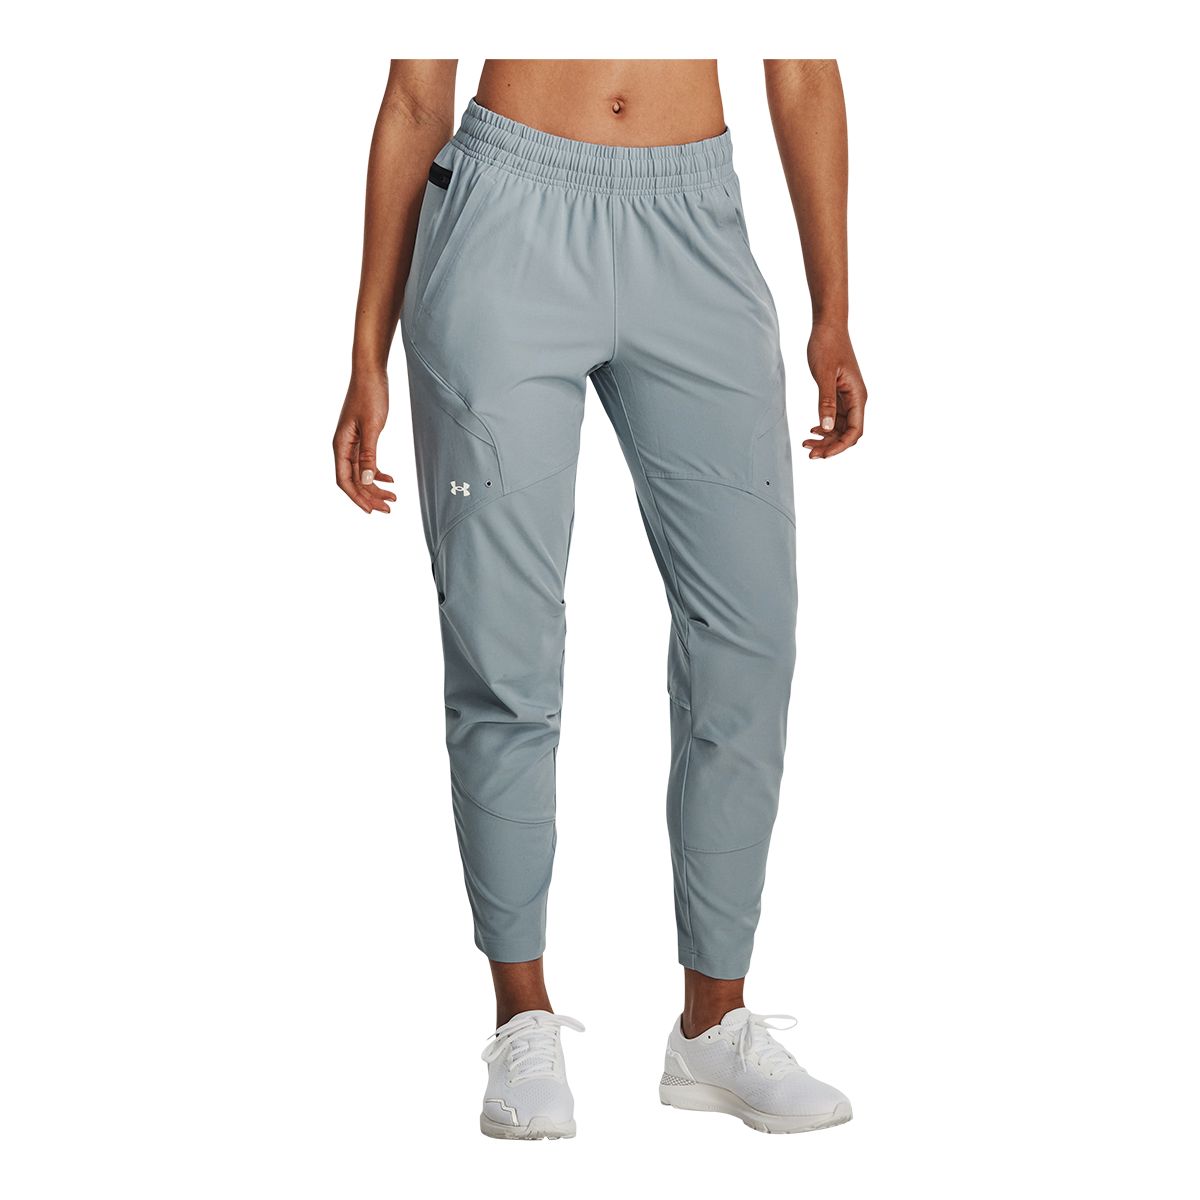 UA Meridian Joggers in Black, Women's Fashion, Bottoms, Other